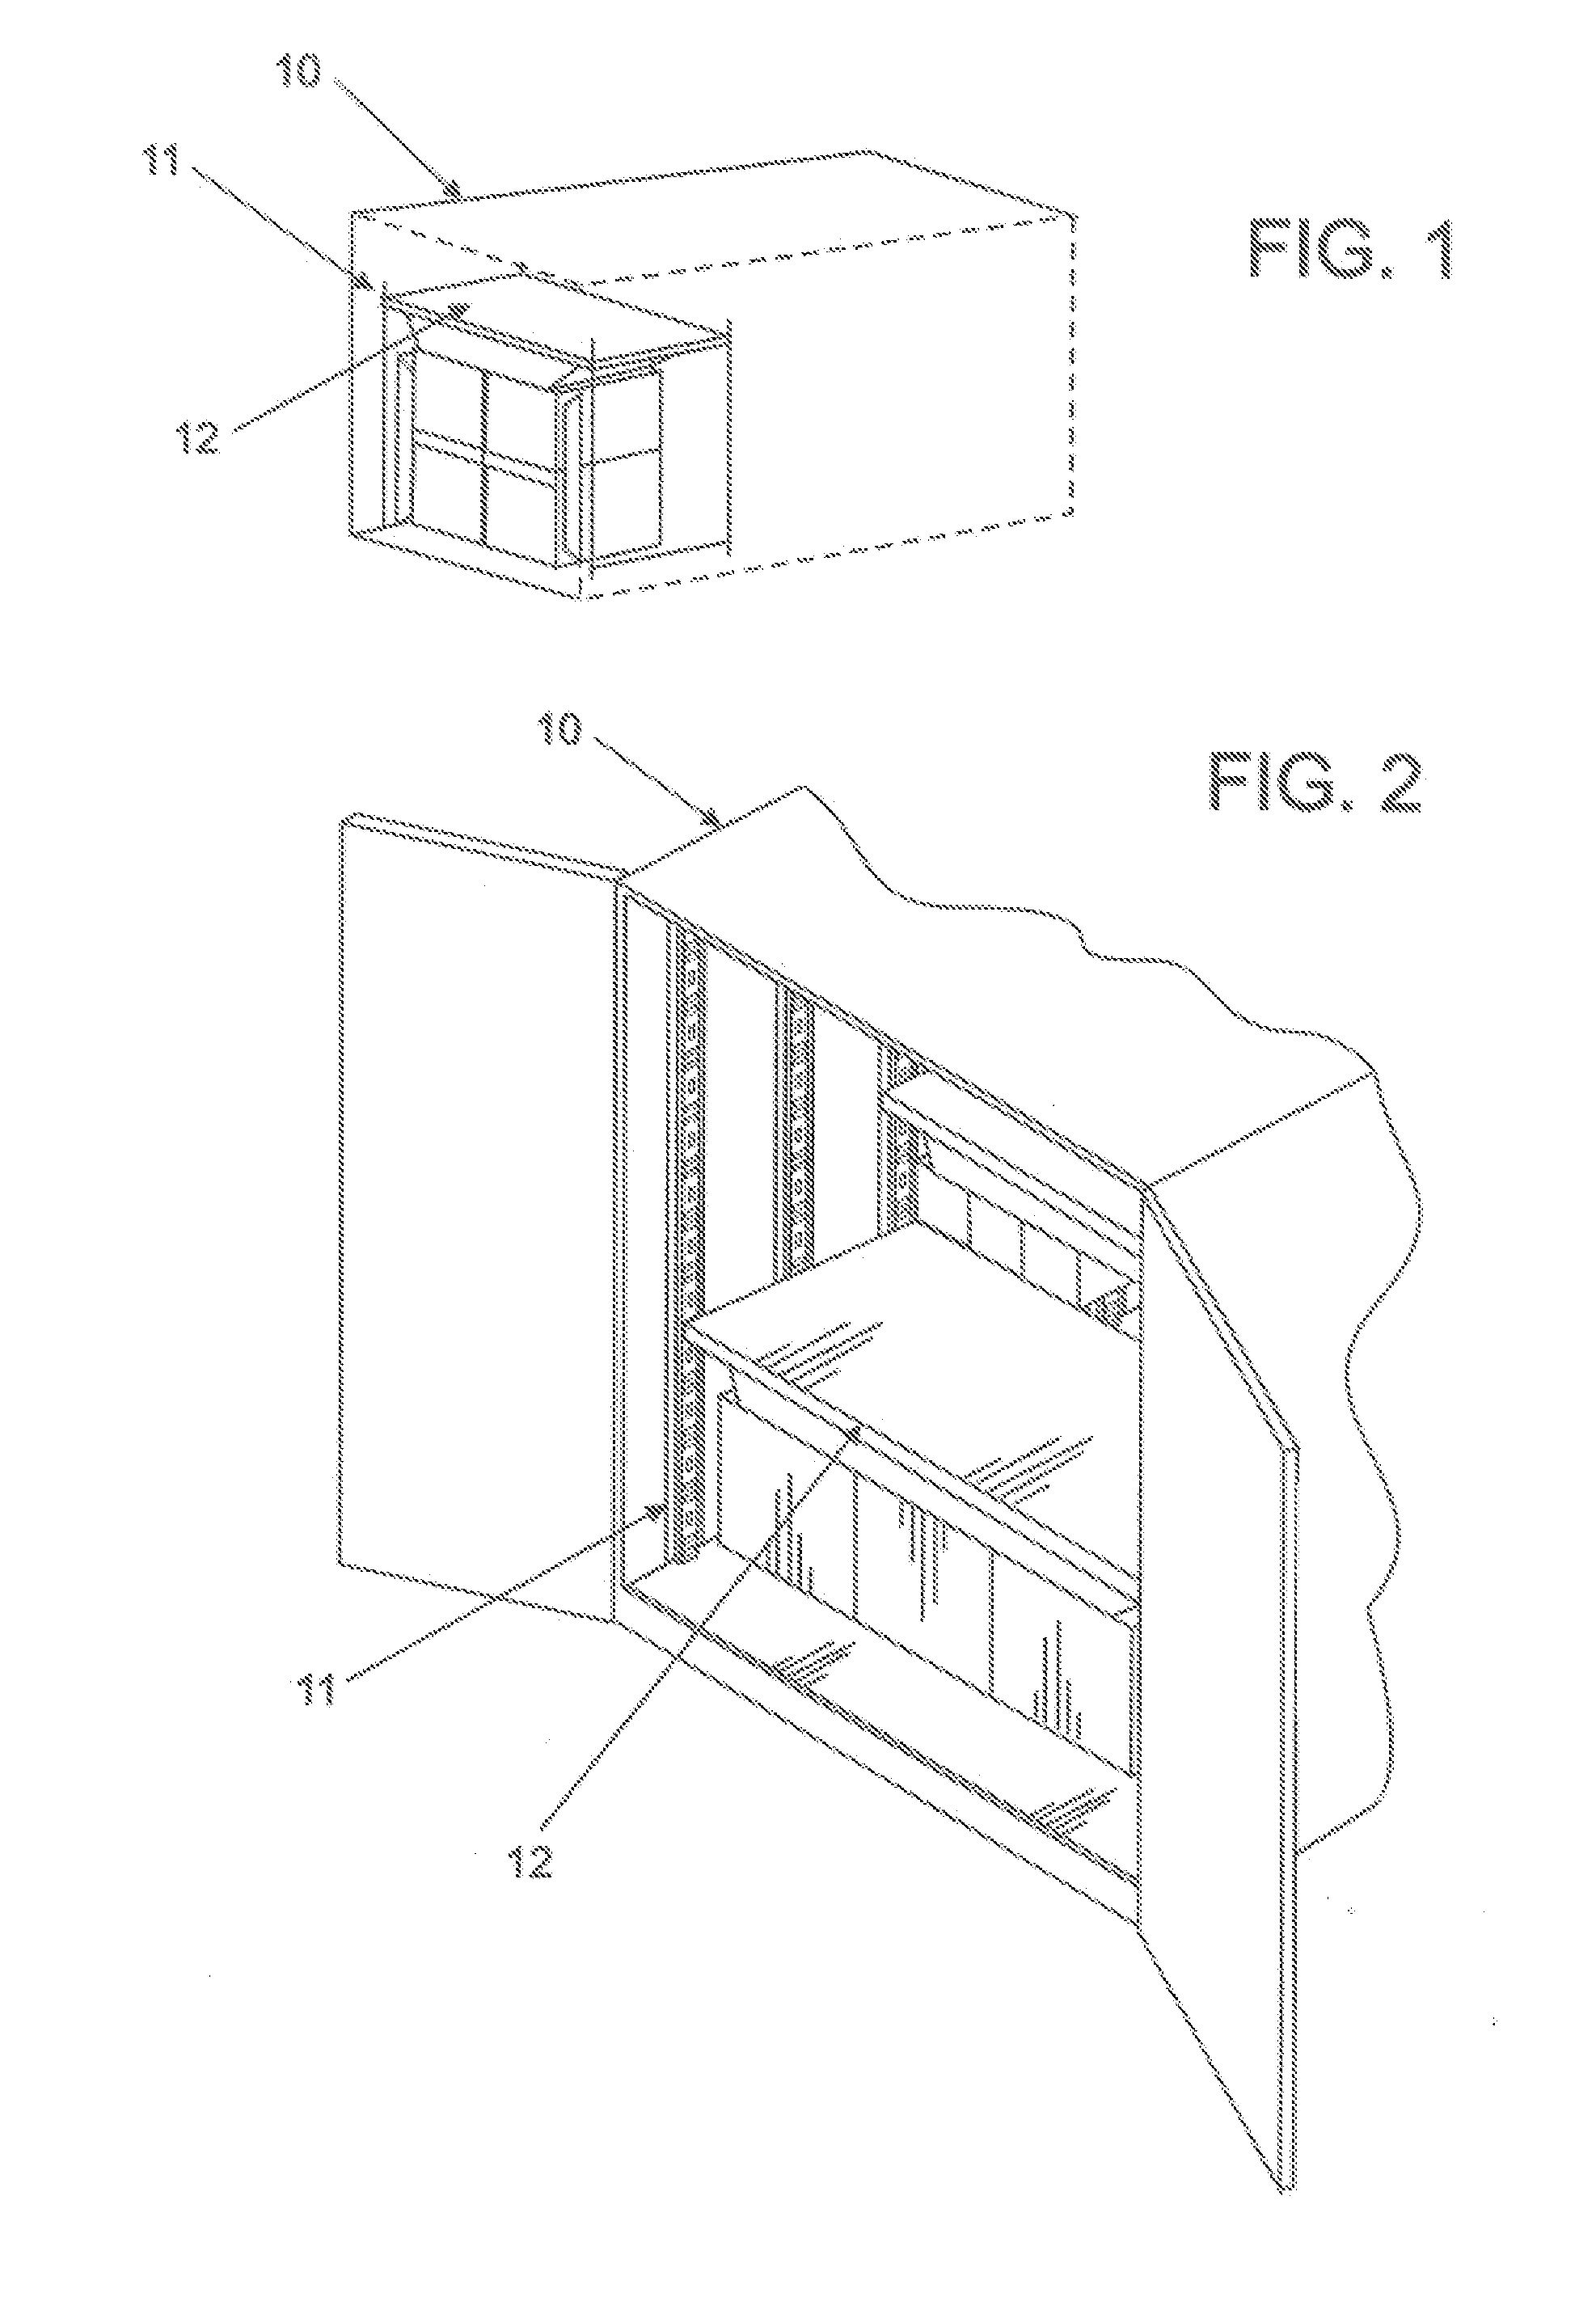 Apparatus and Method for Protecting Products from Damage During Shipment